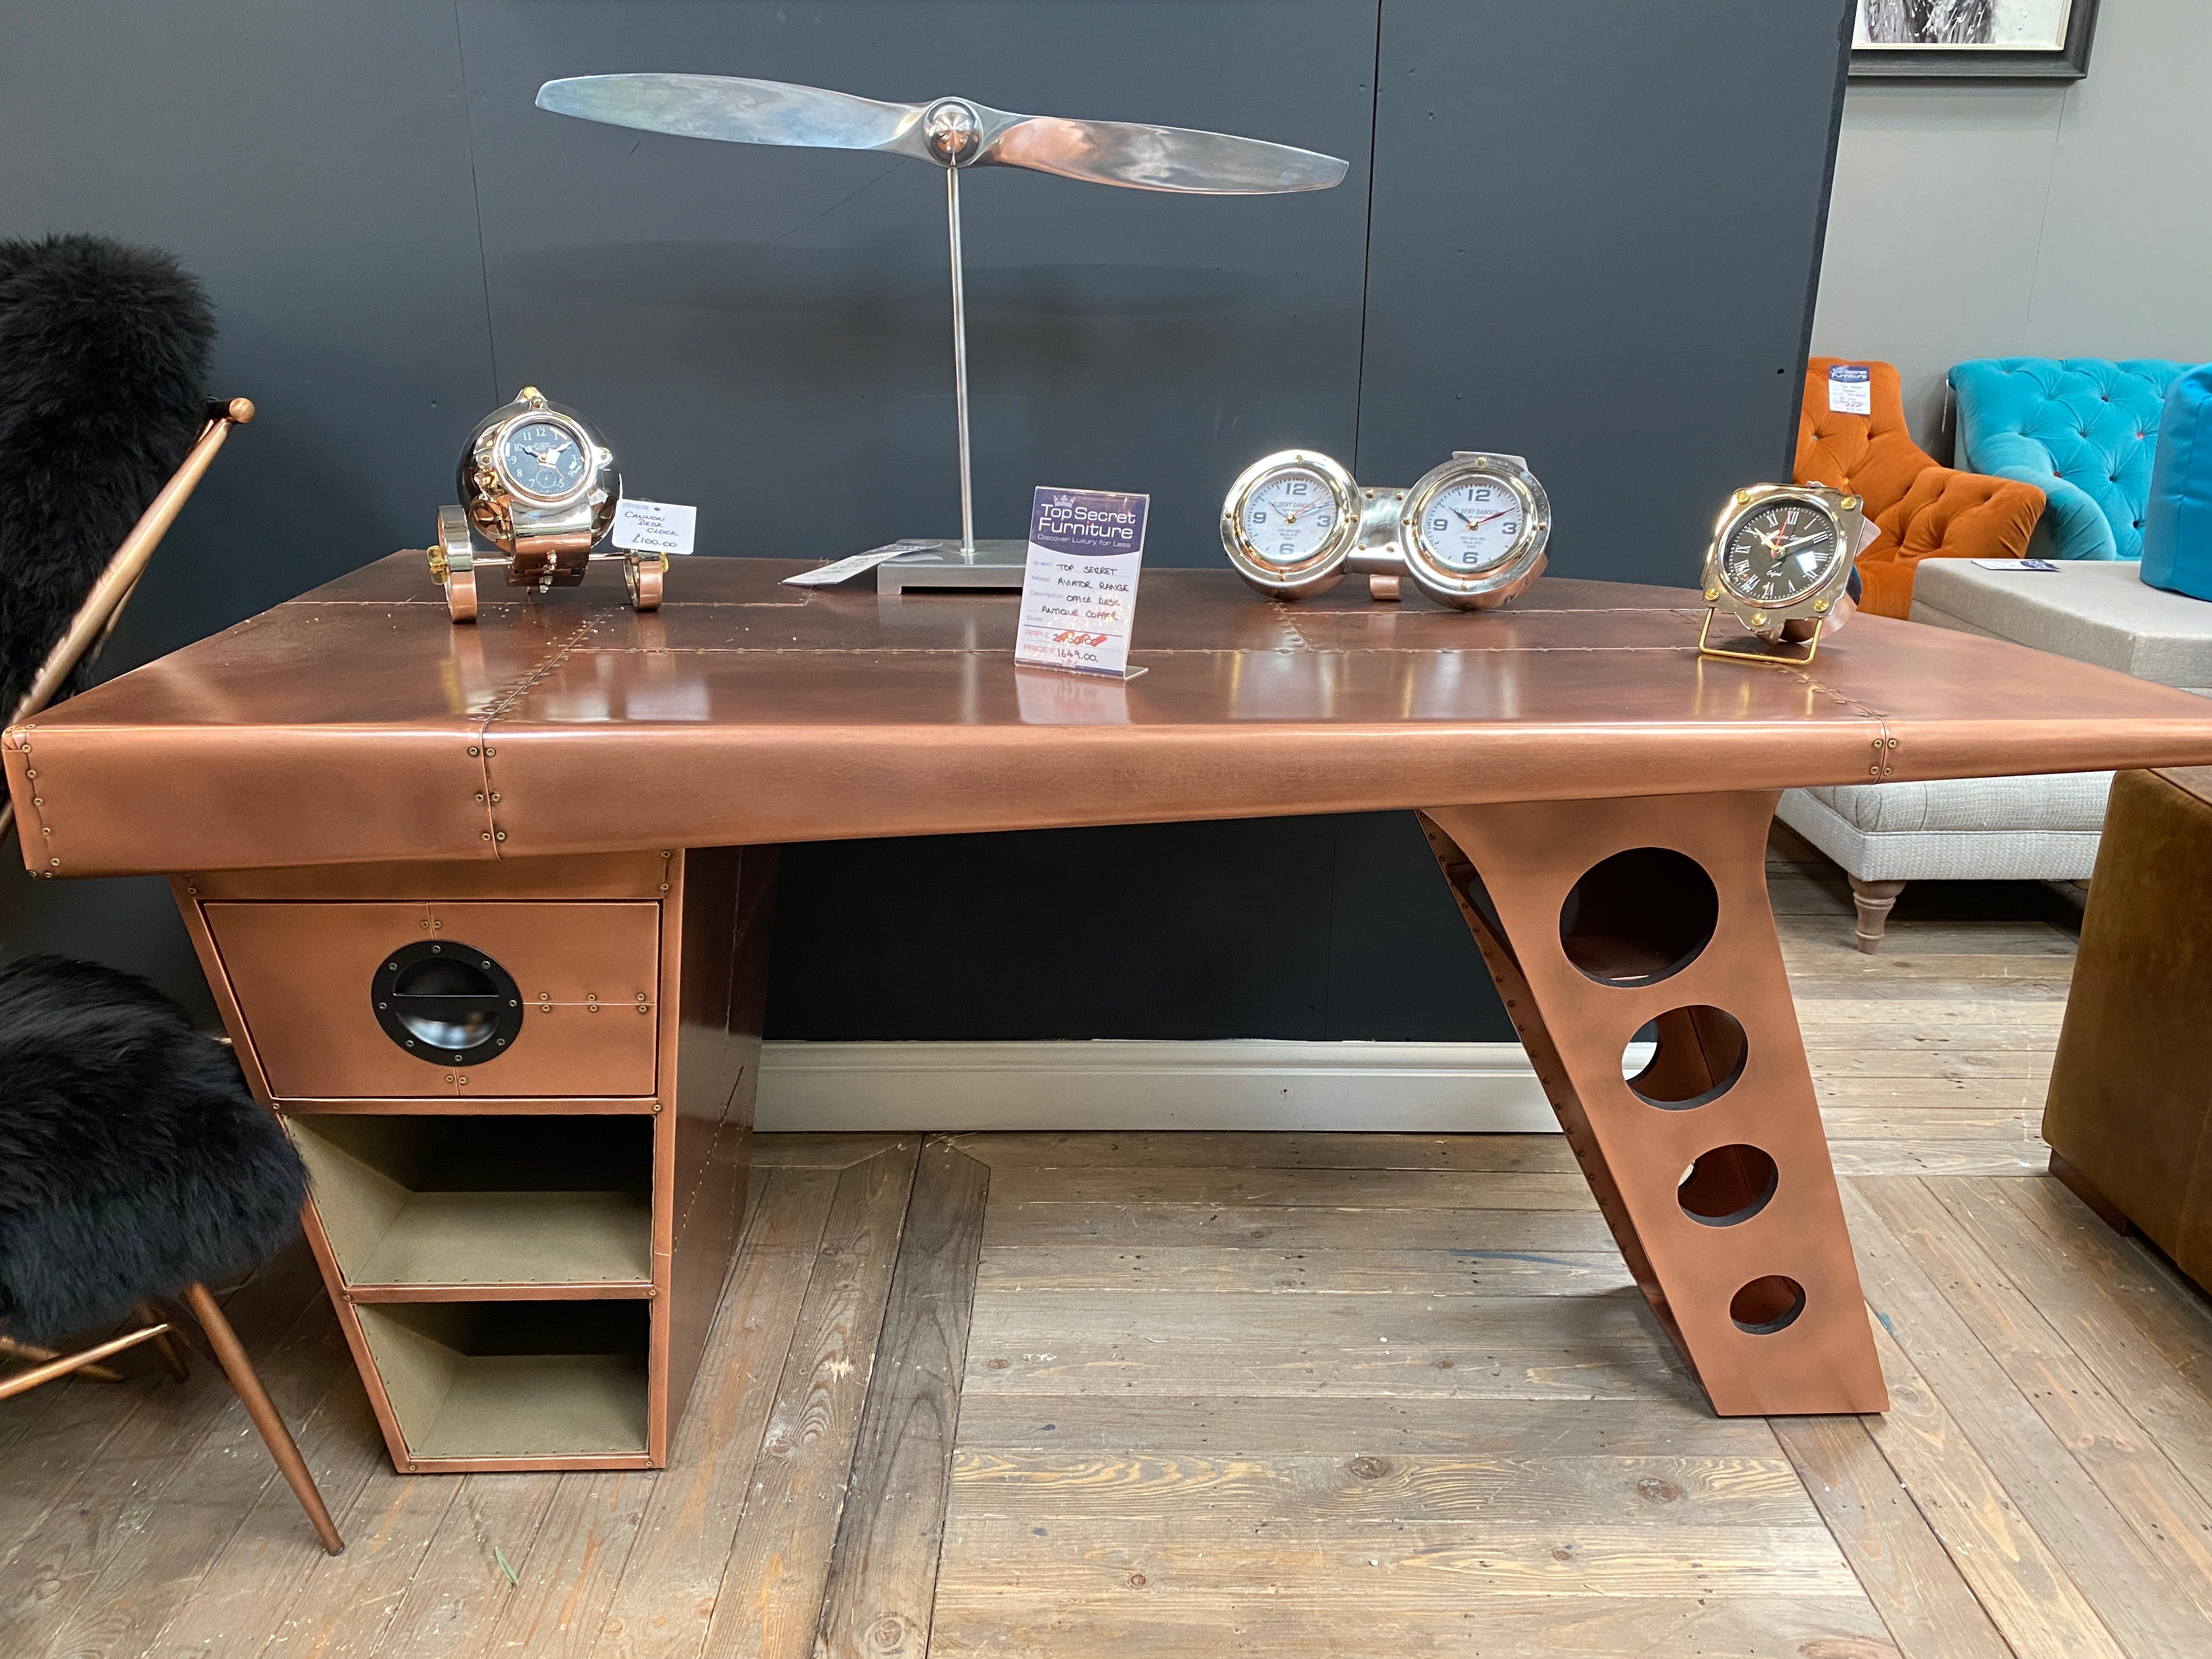 Aviator Half Wing Desk available from Top Secret Furniture, Holmes Chapel, Cheshire